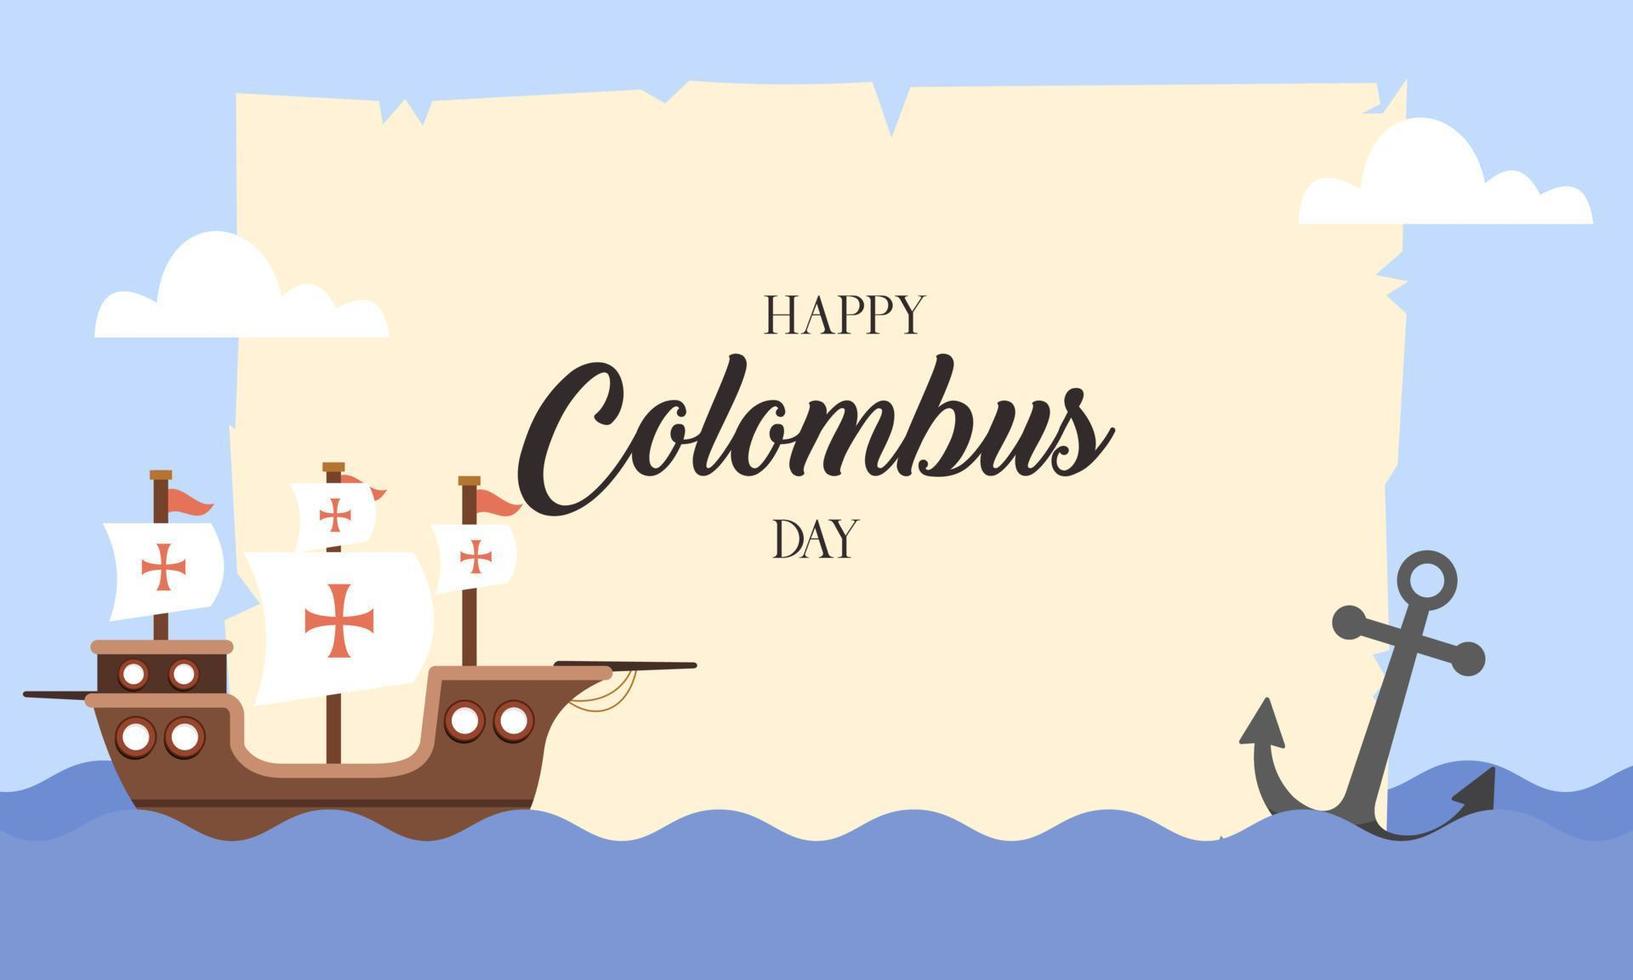 Hand drawn flat columbus day background vector